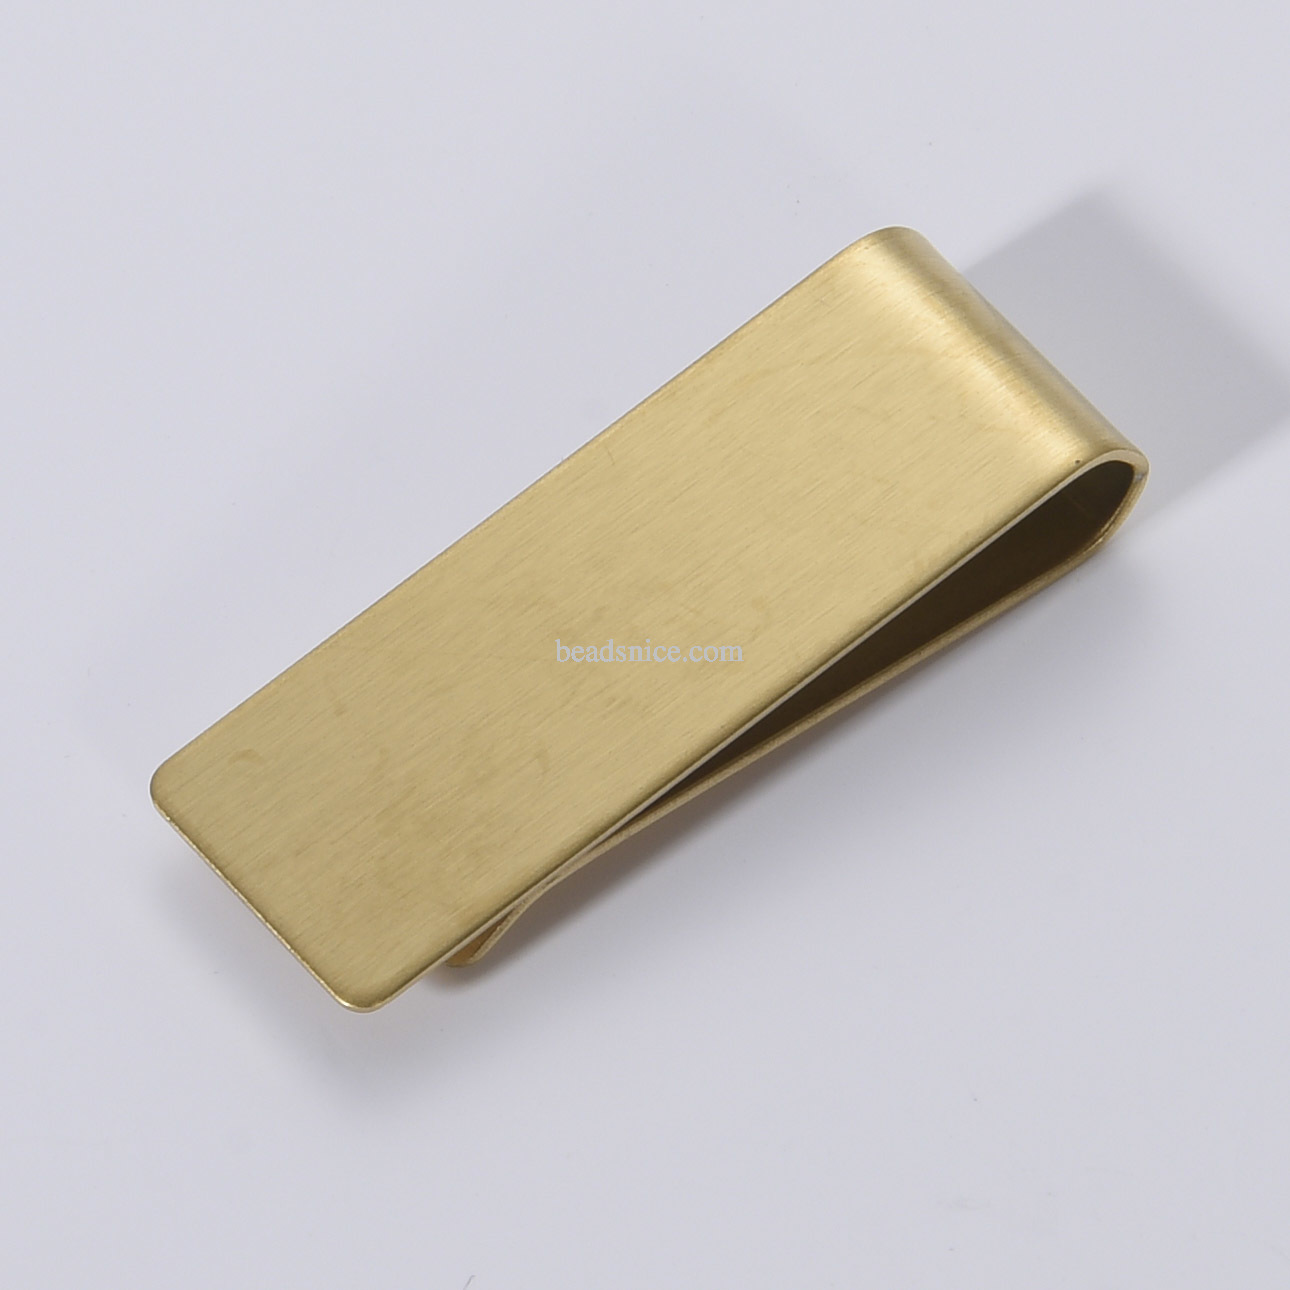 Stainless Steel Money Clip Silver Metal Money Clips Slim Cash Wallet Credit Card Money Cards Holder for Women Durable Portable a